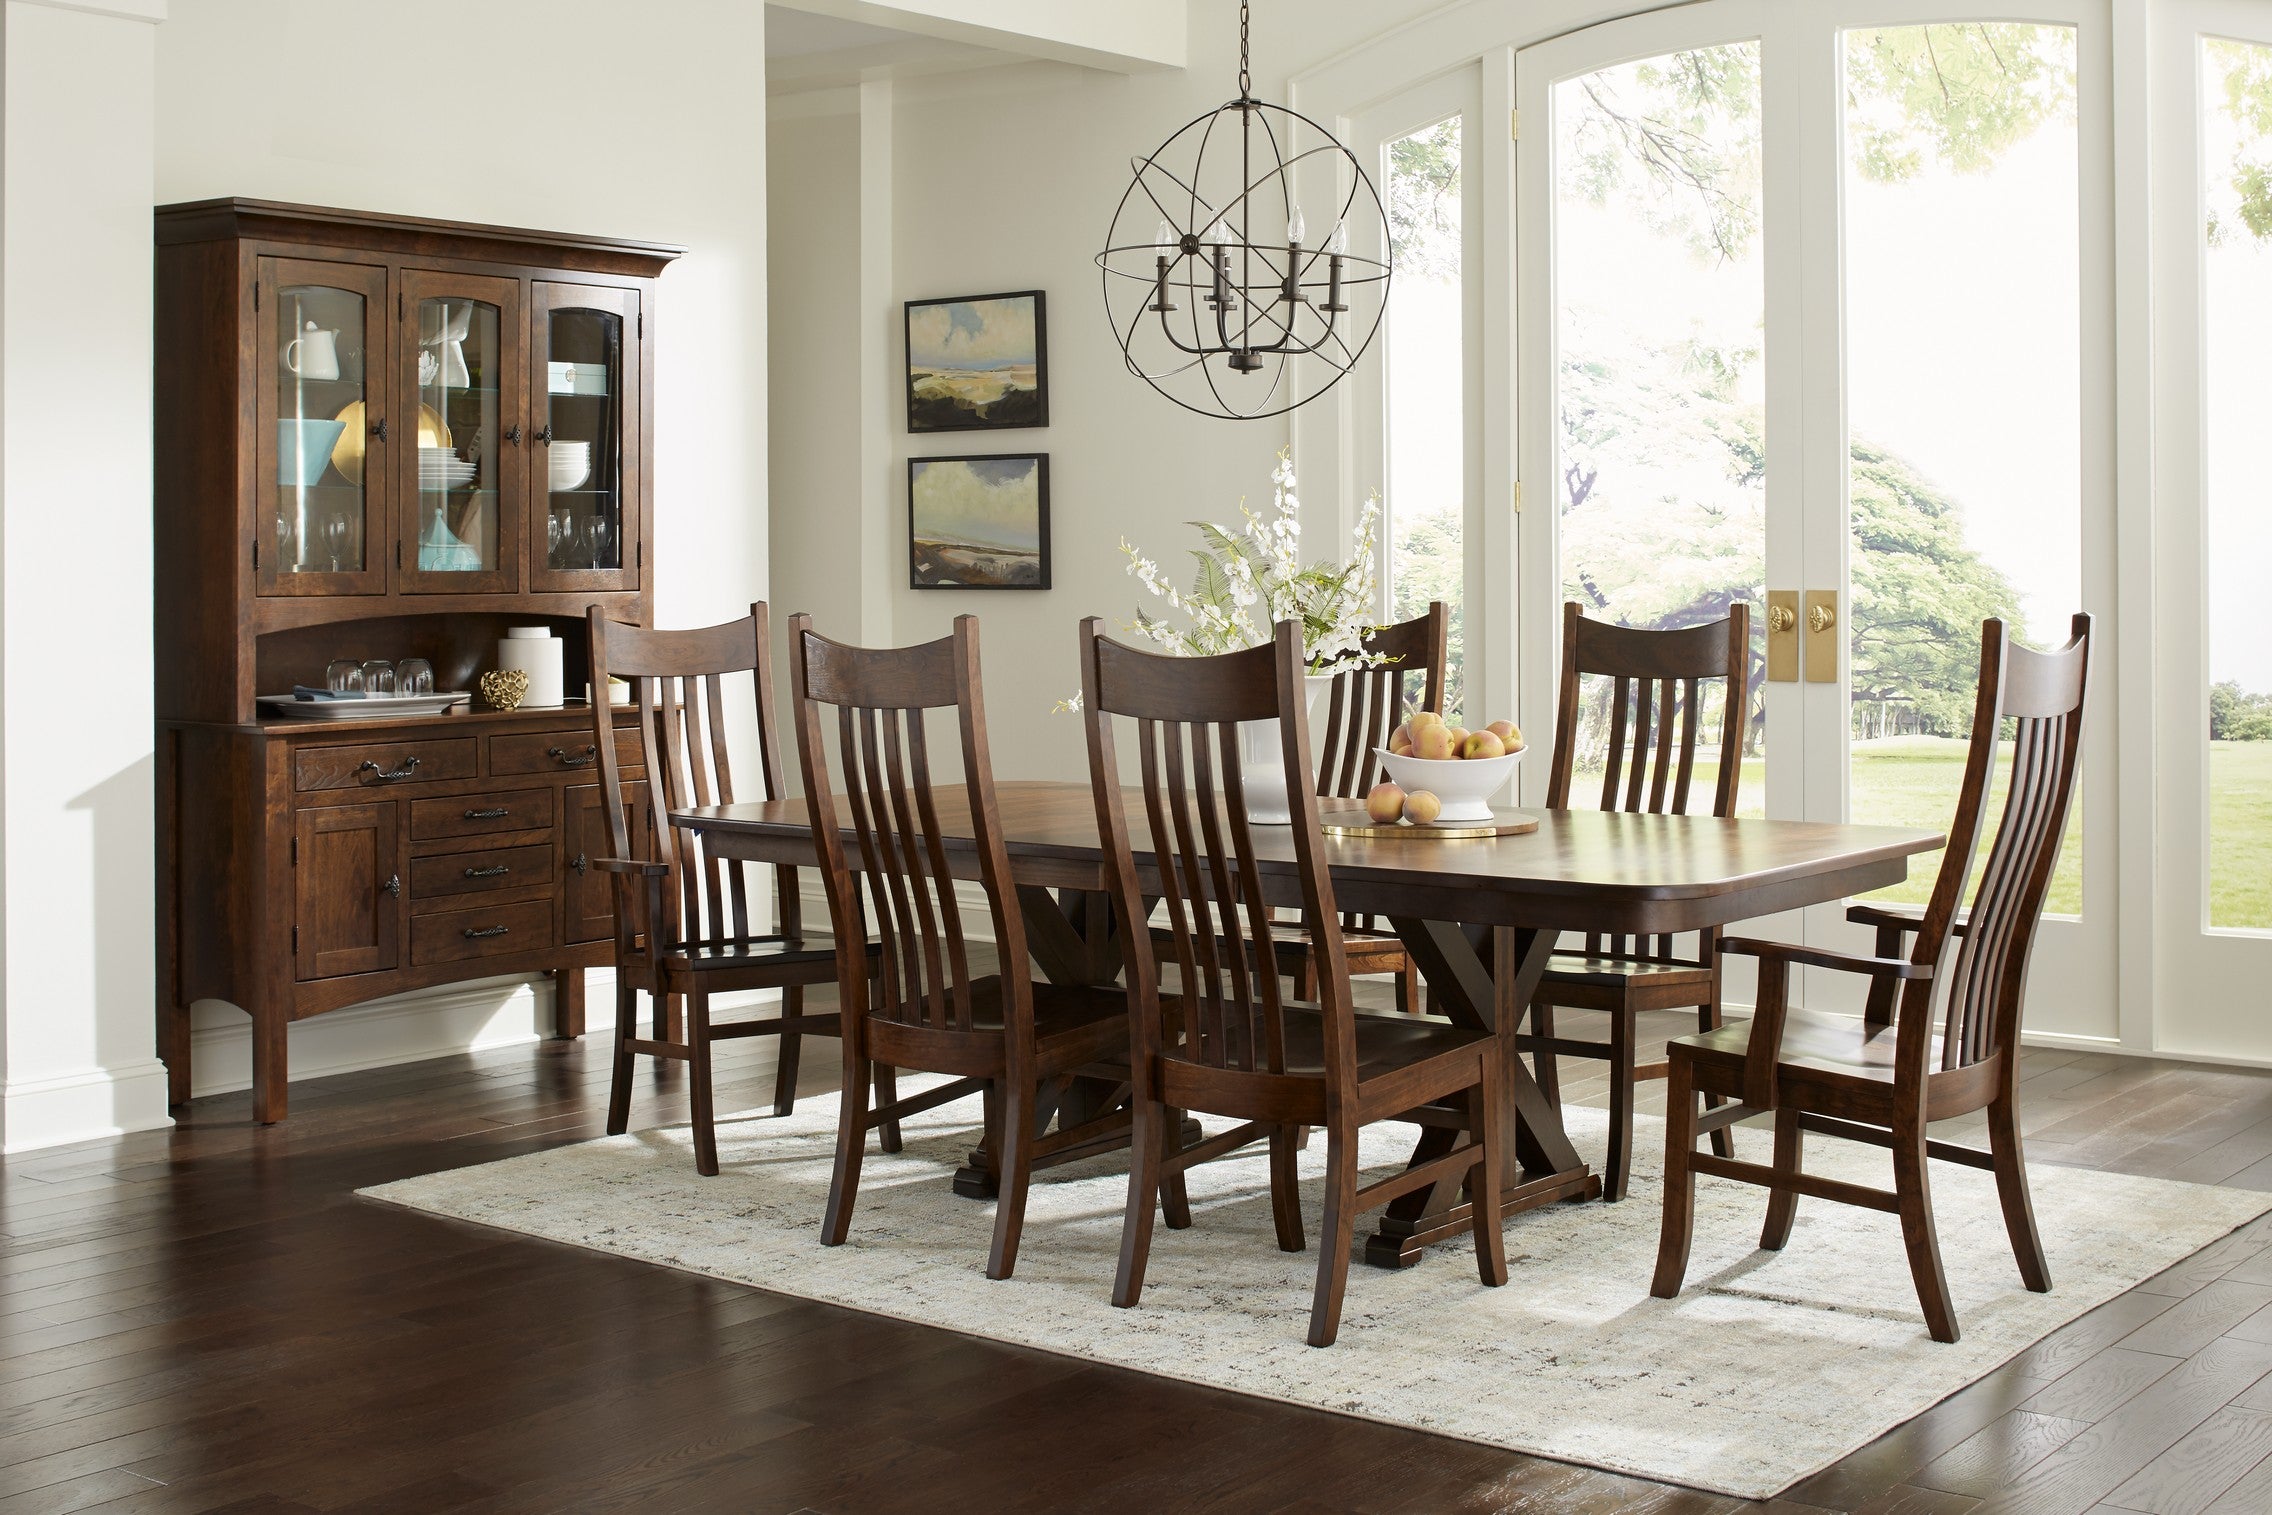 Traditional dining room with a dark wood dining table surrounded by matching solid wood chairs